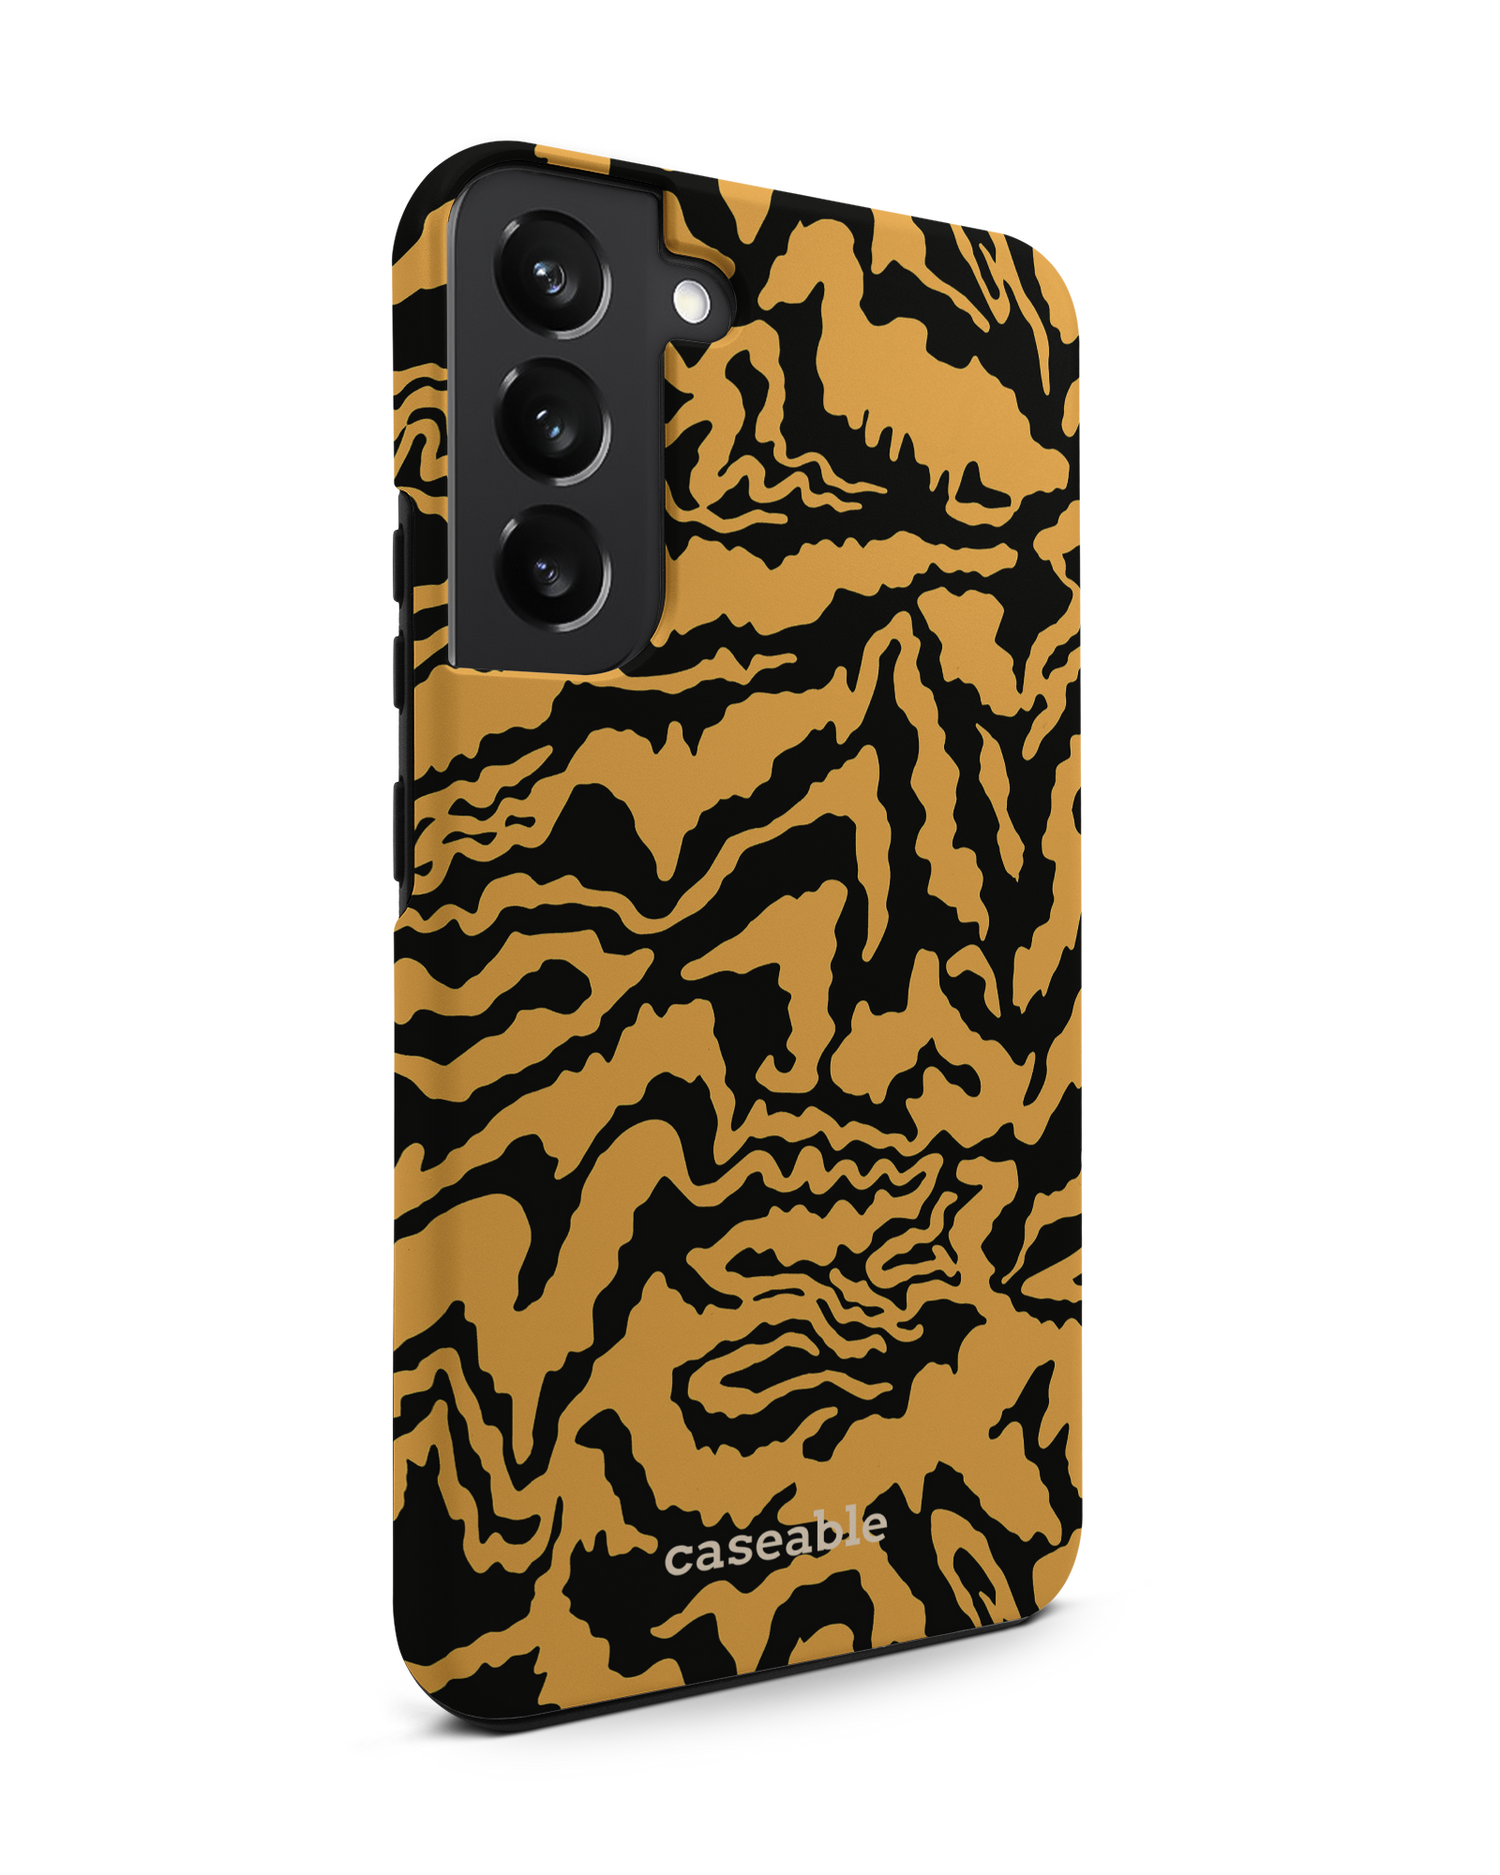 Warped Tiger Stripes Premium Phone Case Samsung Galaxy S22 Plus 5G: View from the left side